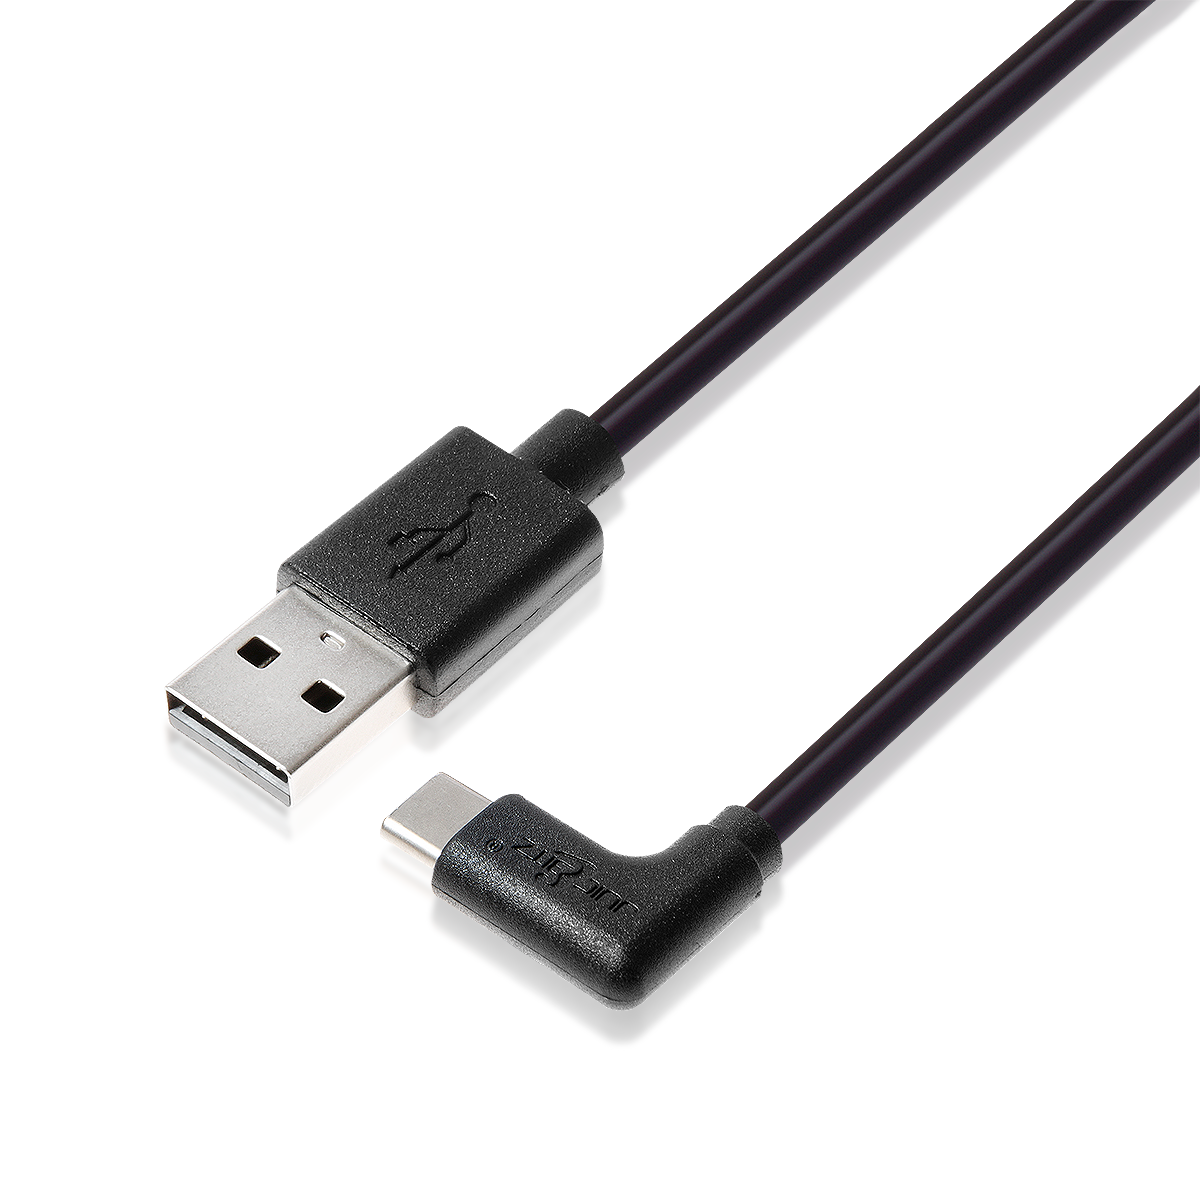 USB 2.0 Male to Angled USB-C 3A Fast Charger Data Cable - Black